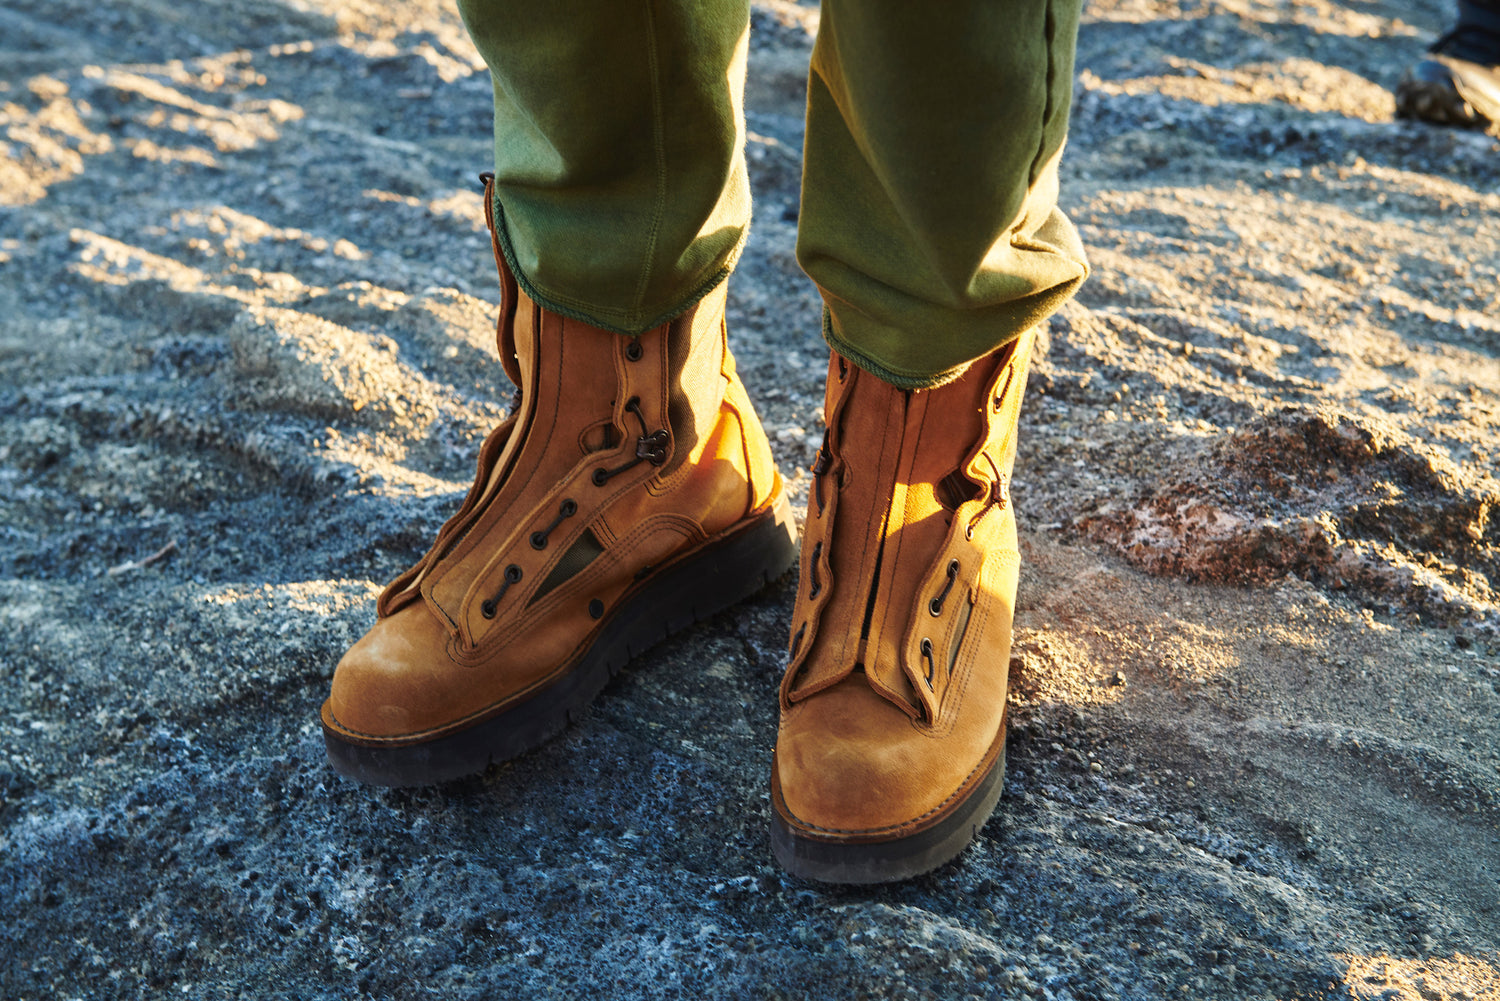 White Mountaineering × Danner Boots – White Mountaineering